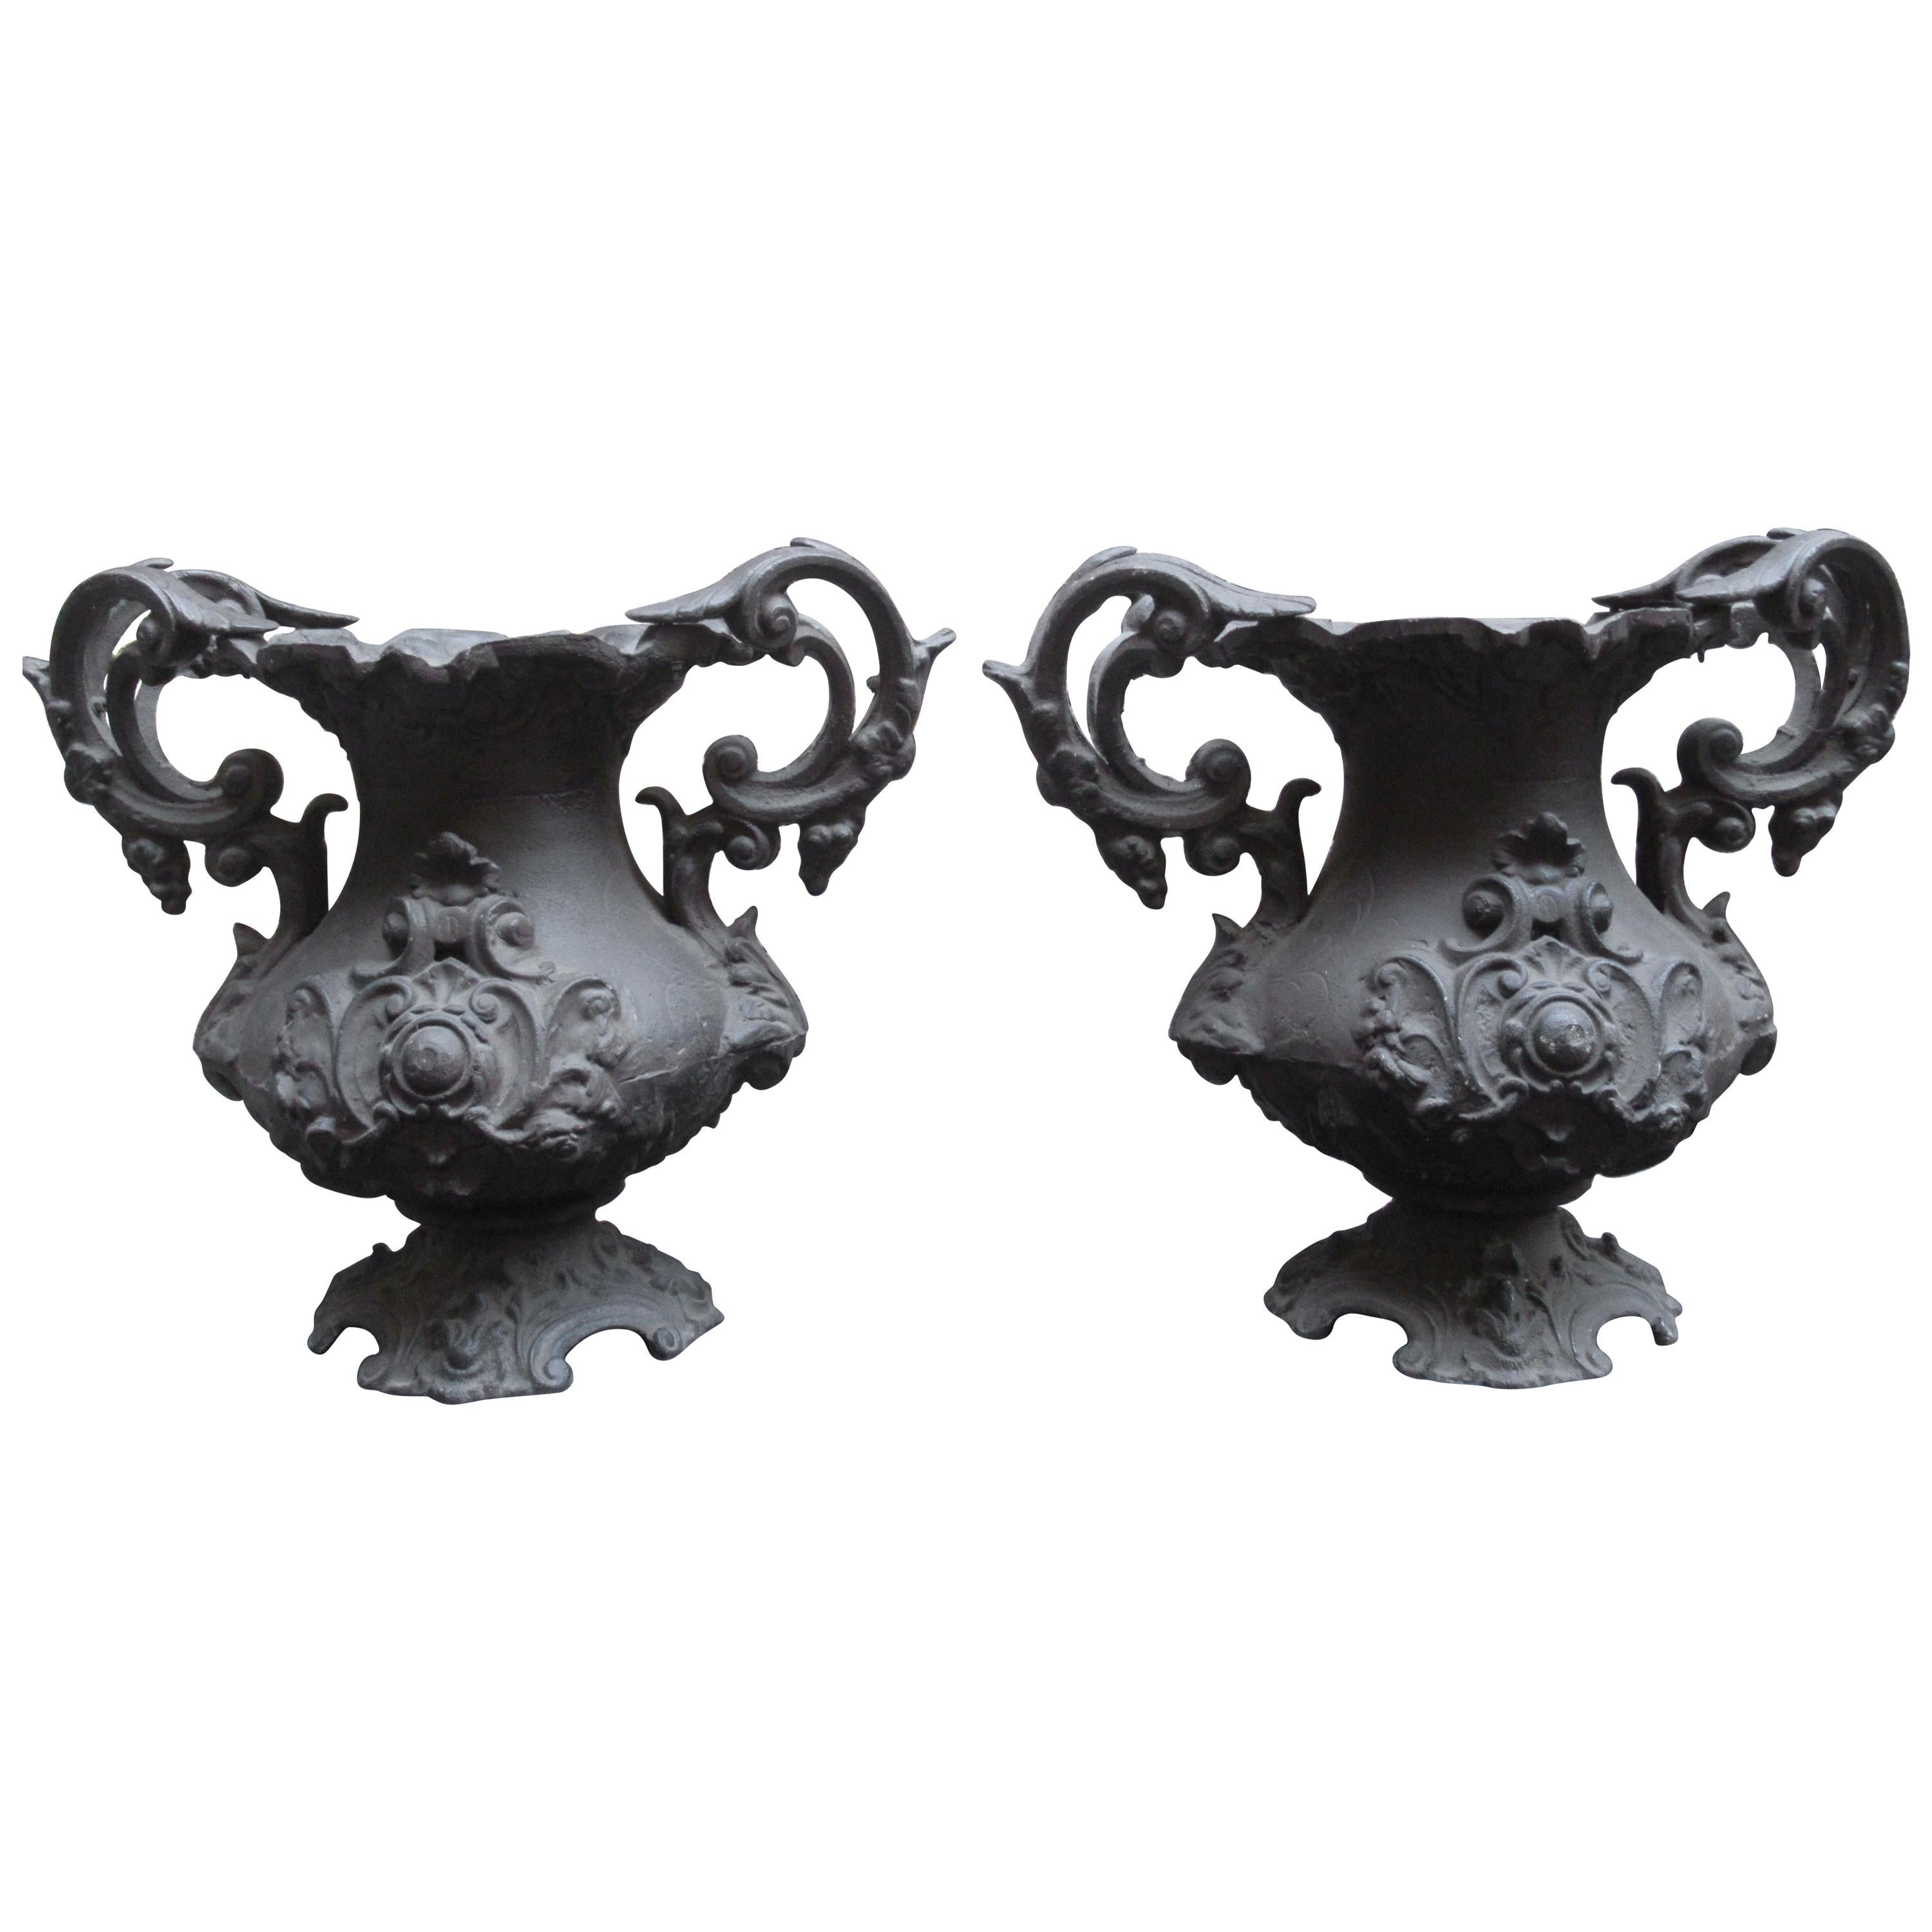 Pair of Early 20th Century Decorative Cast Iron Urns For Sale